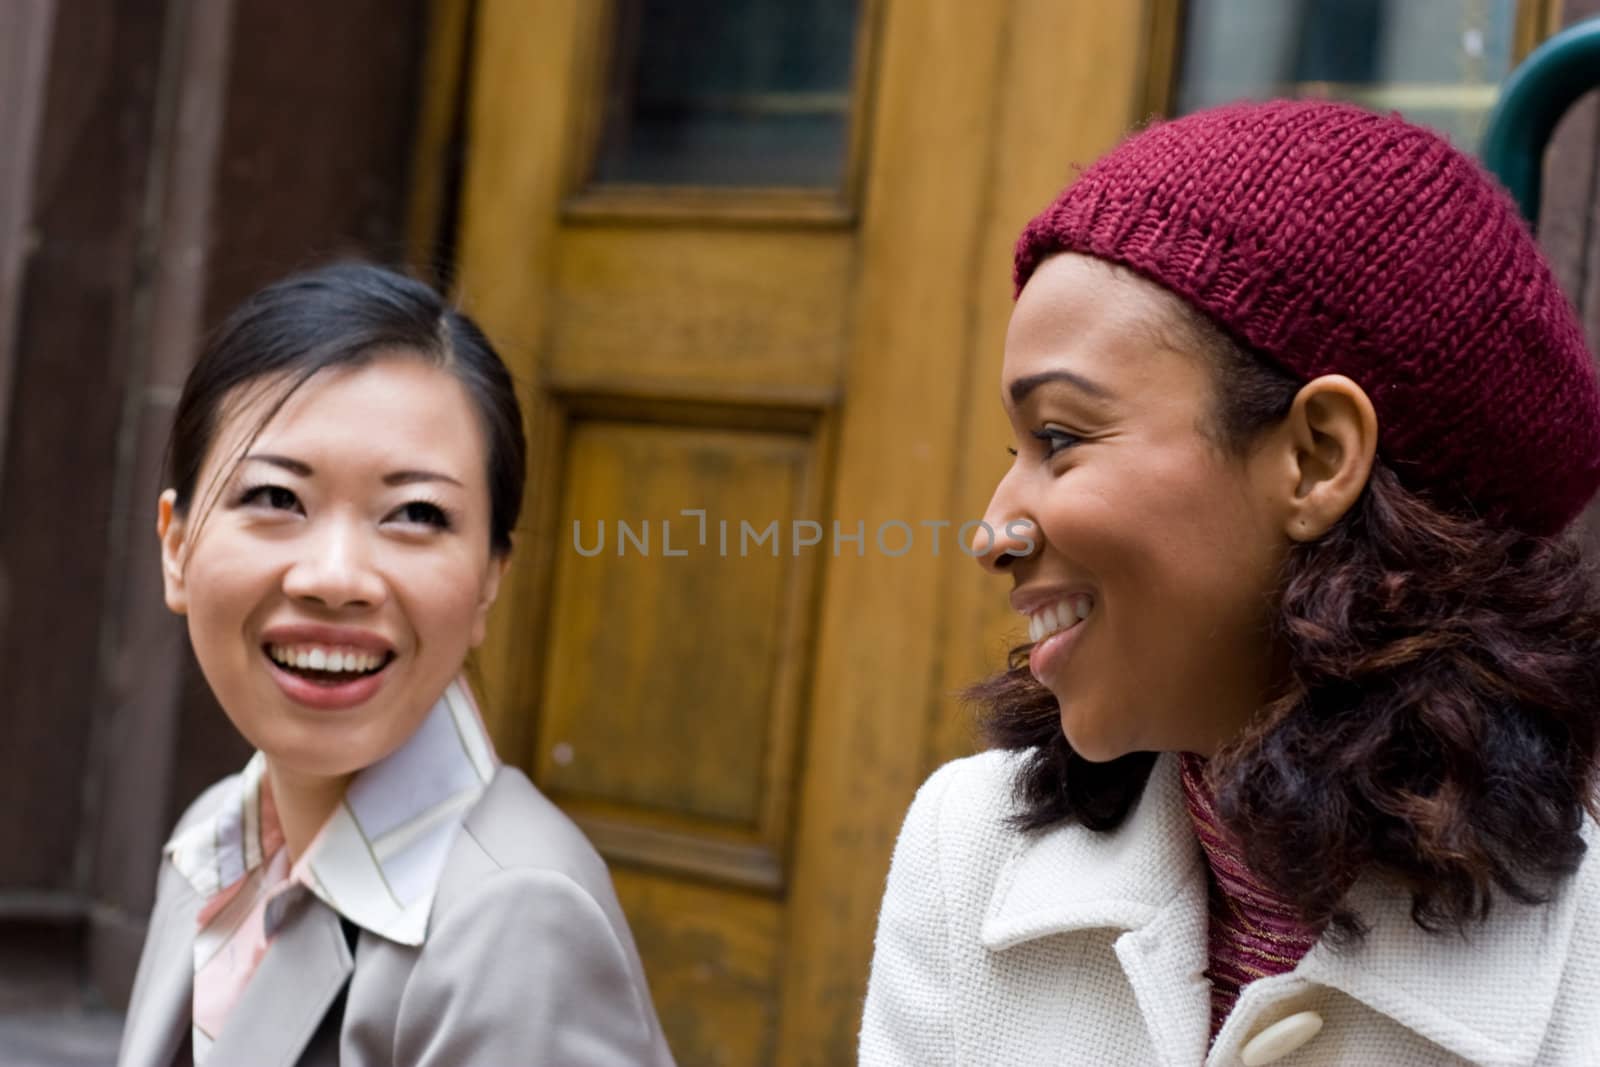 Two business women having a casual meeting or discussion in the city.  Shallow depth of field.